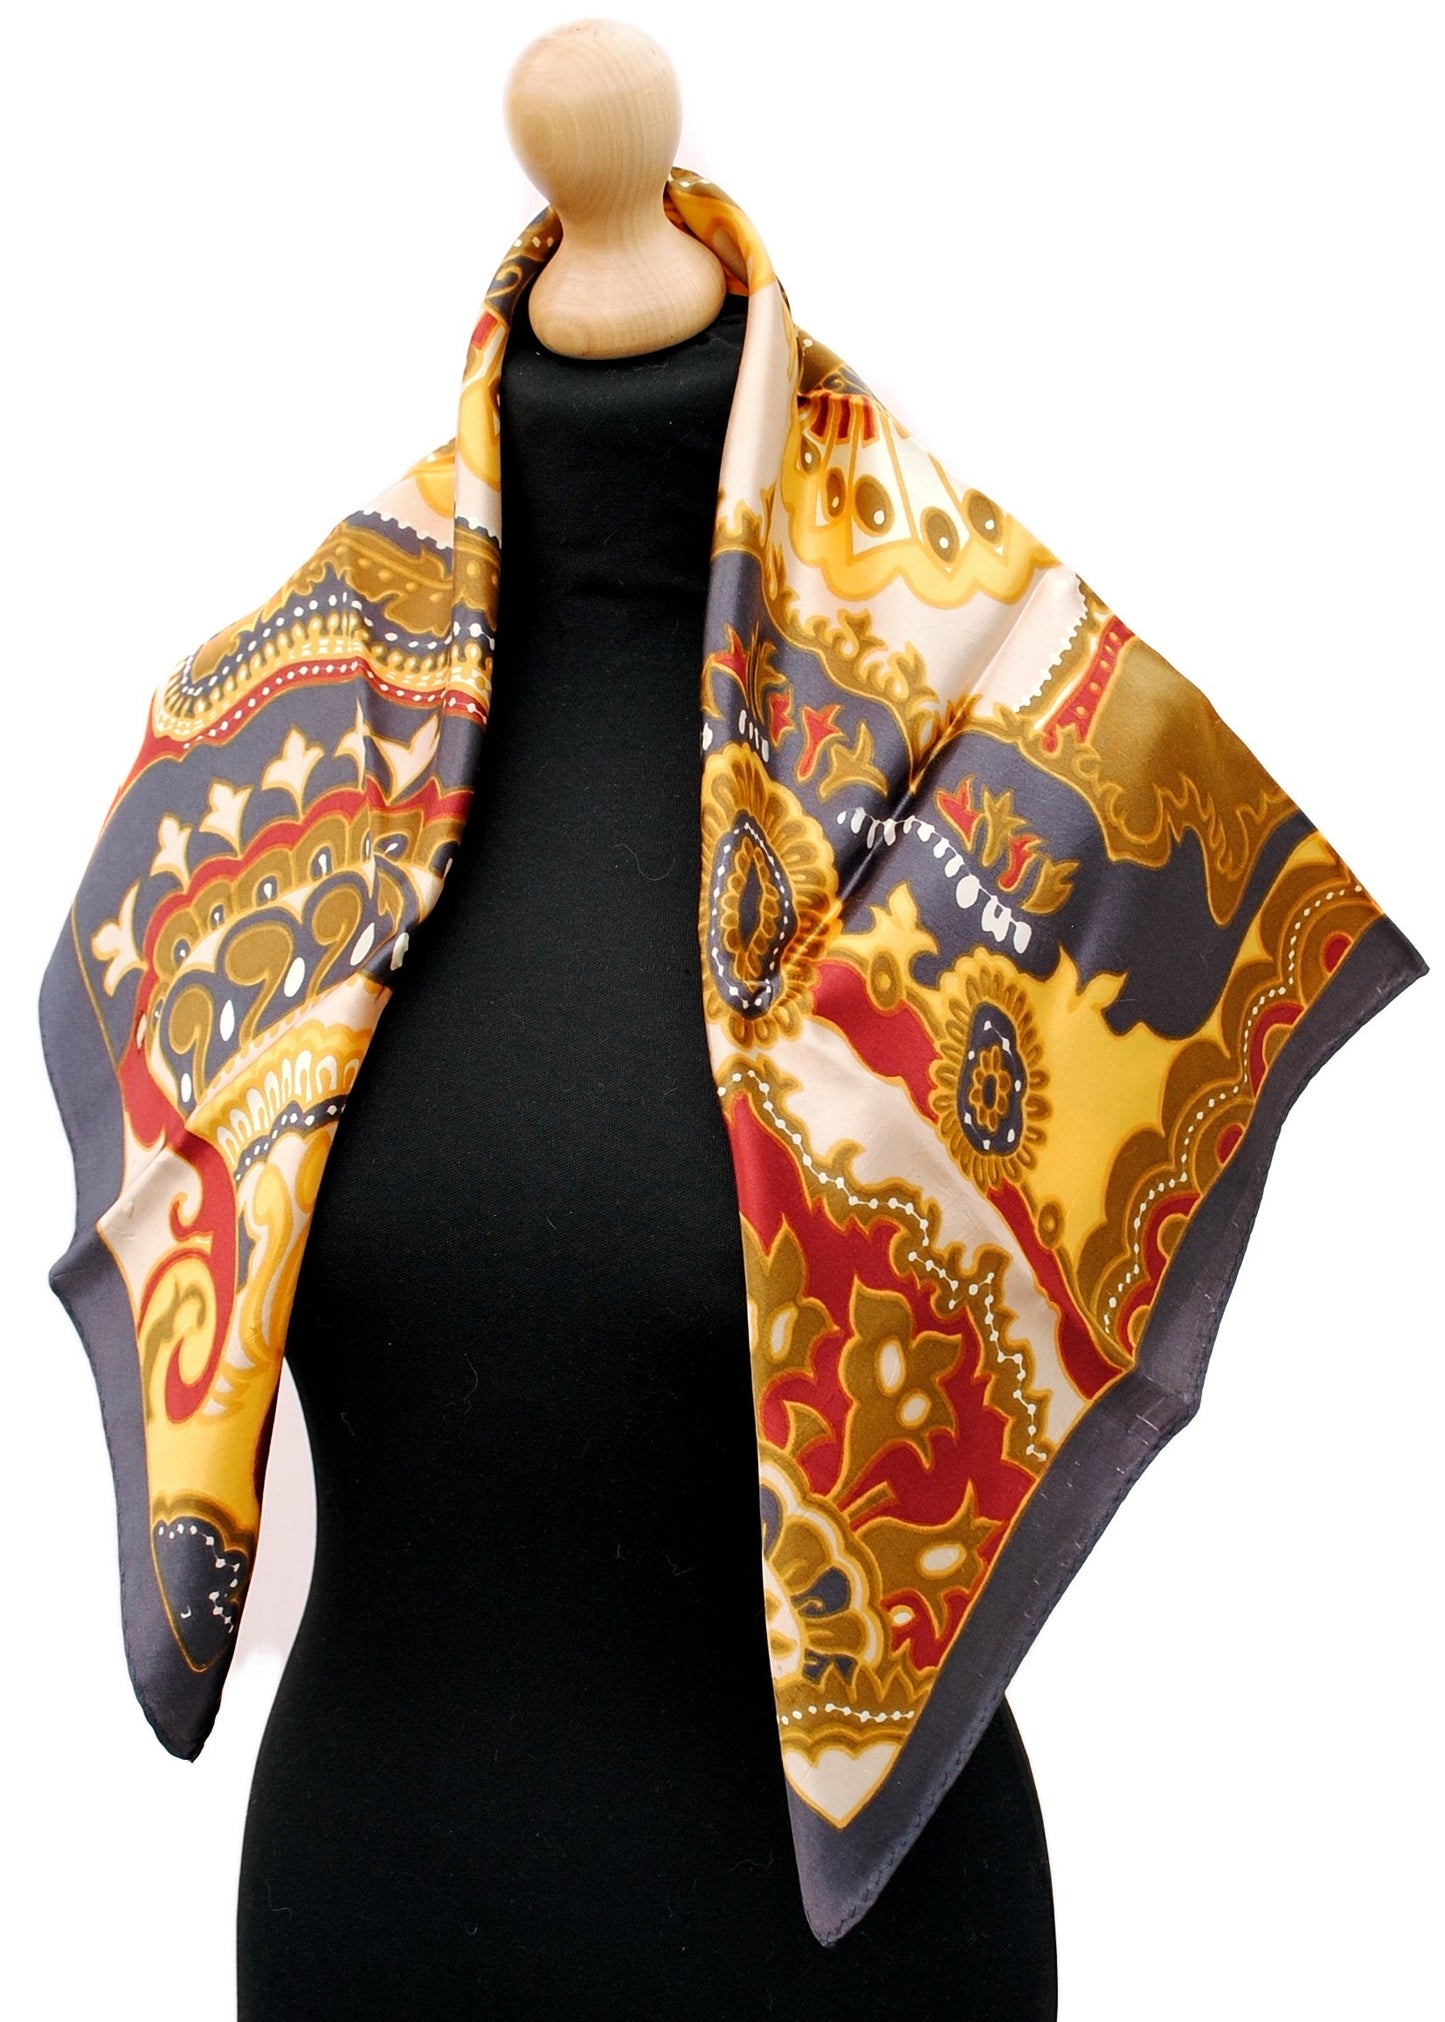 Dynamic Pattern Shiny Brown, Blue and Red Vintage Scarf